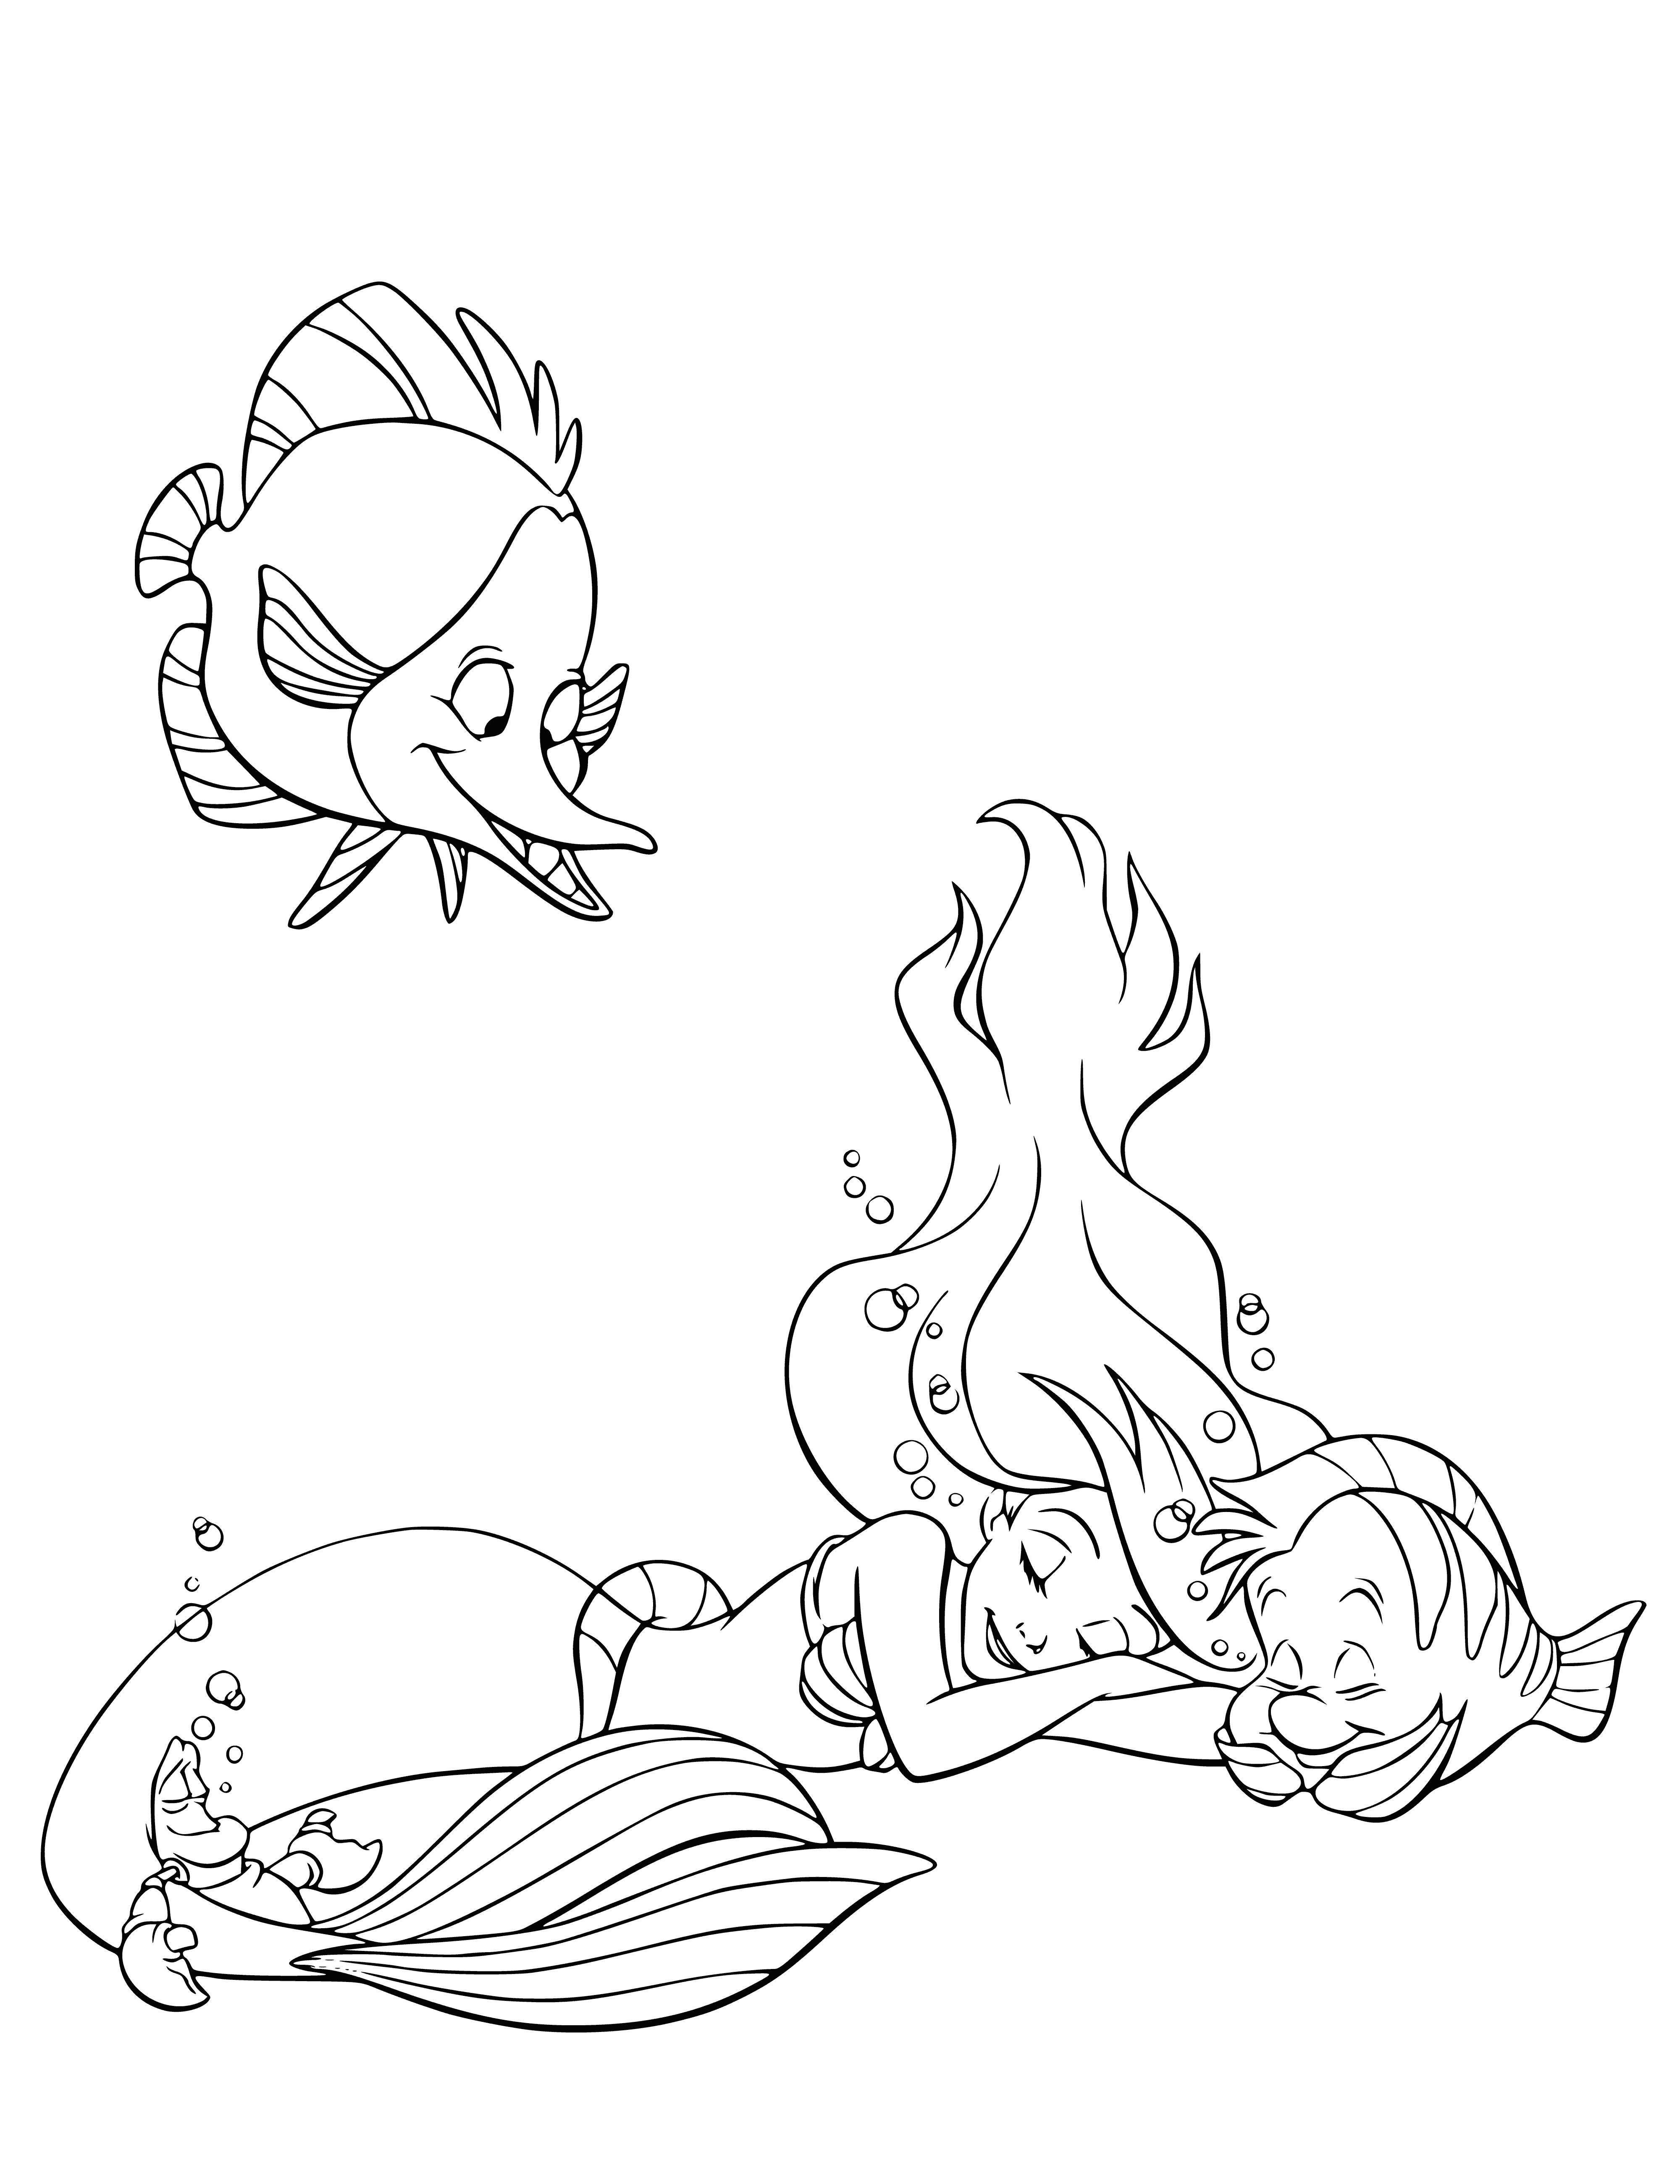 coloring page: Ariel swims and plays among the coral reef with her friends Flounder and Sebastian in her dream, wearing a pink seashell bra and green fishtail, her long red hair flowing behind her.